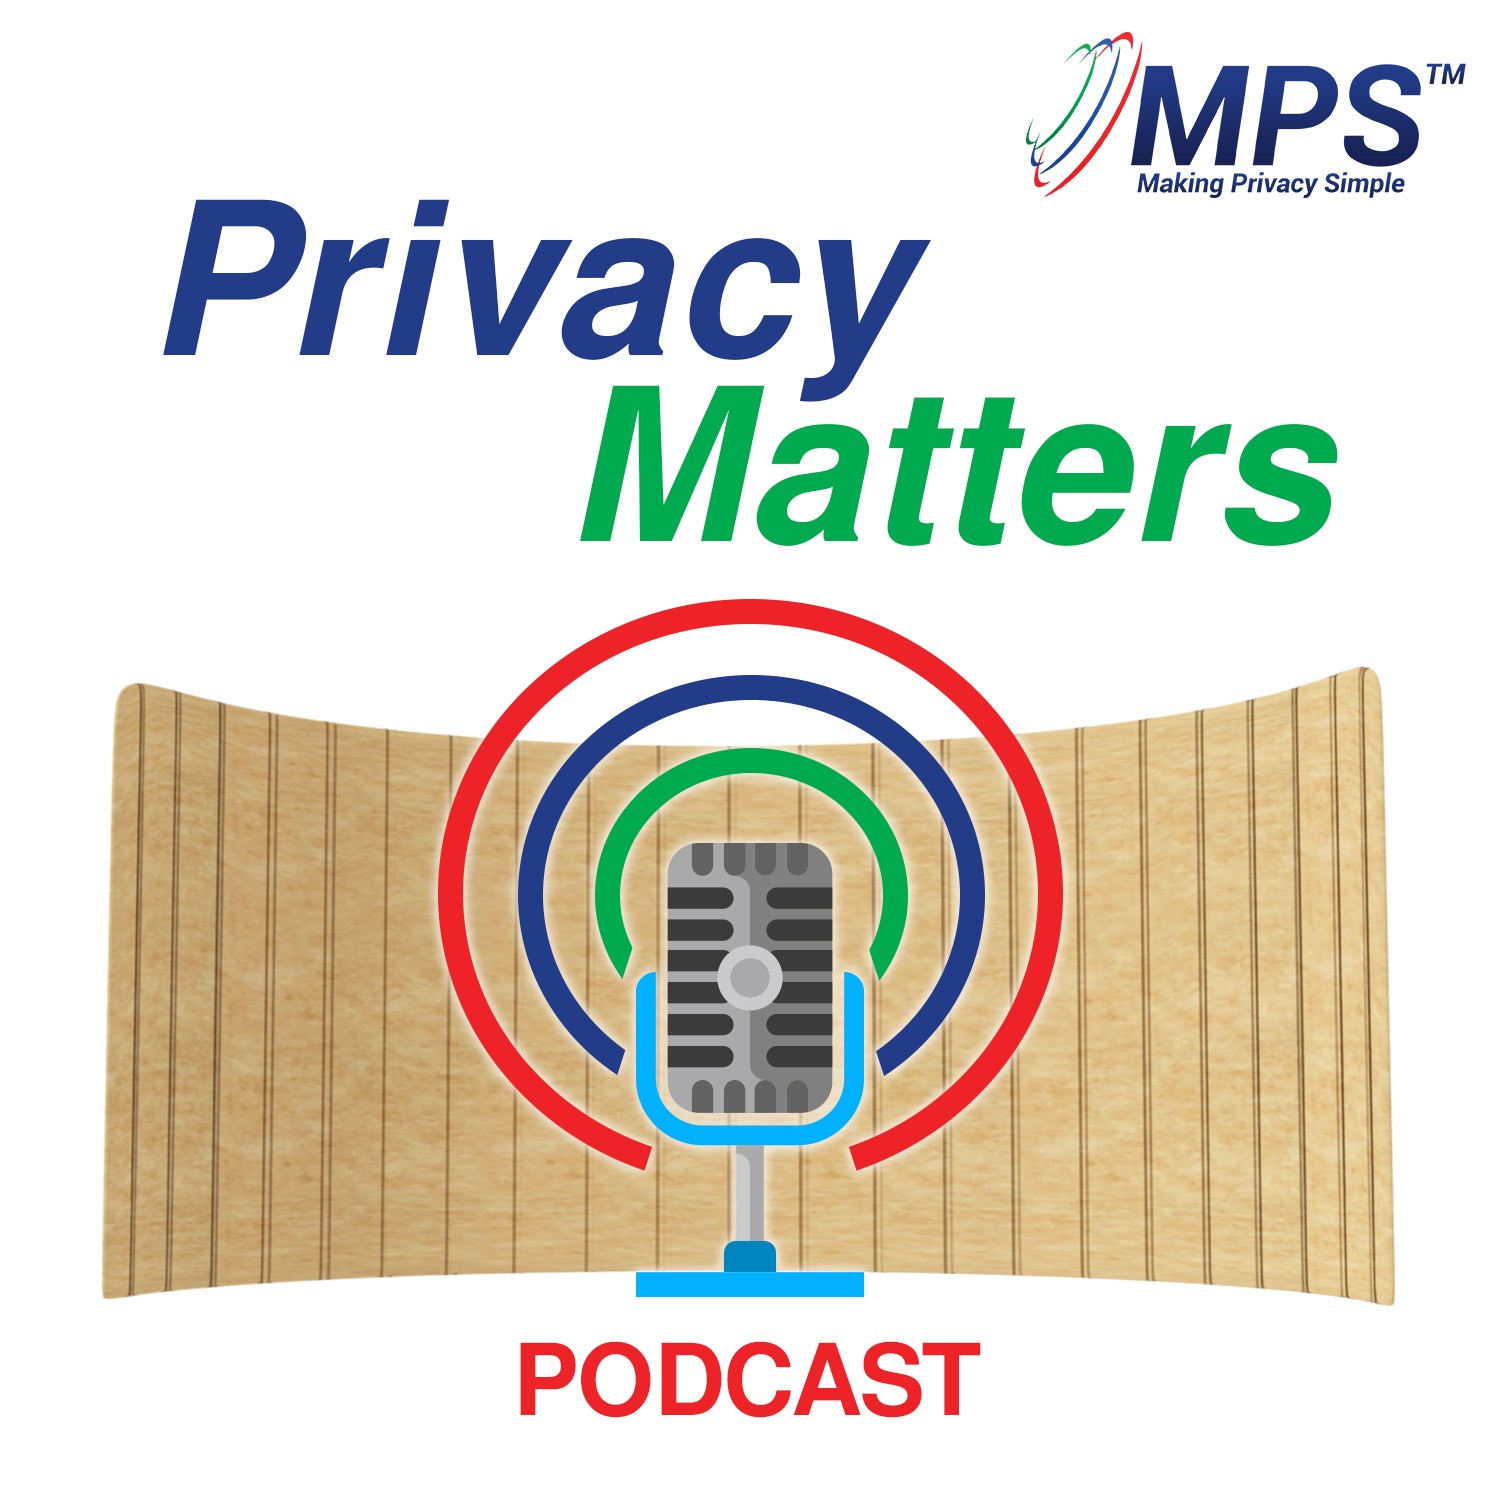 Privacy Matters Podcast